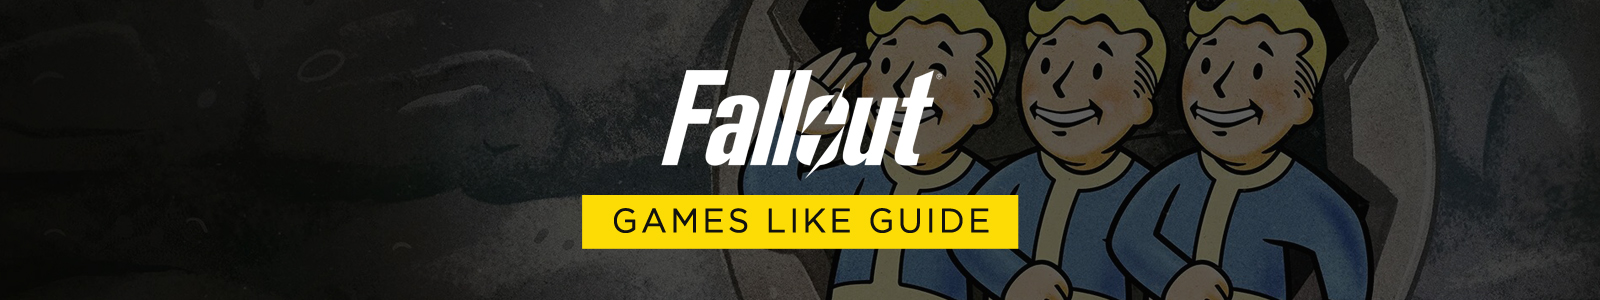 FALLOUT 4 games like guide